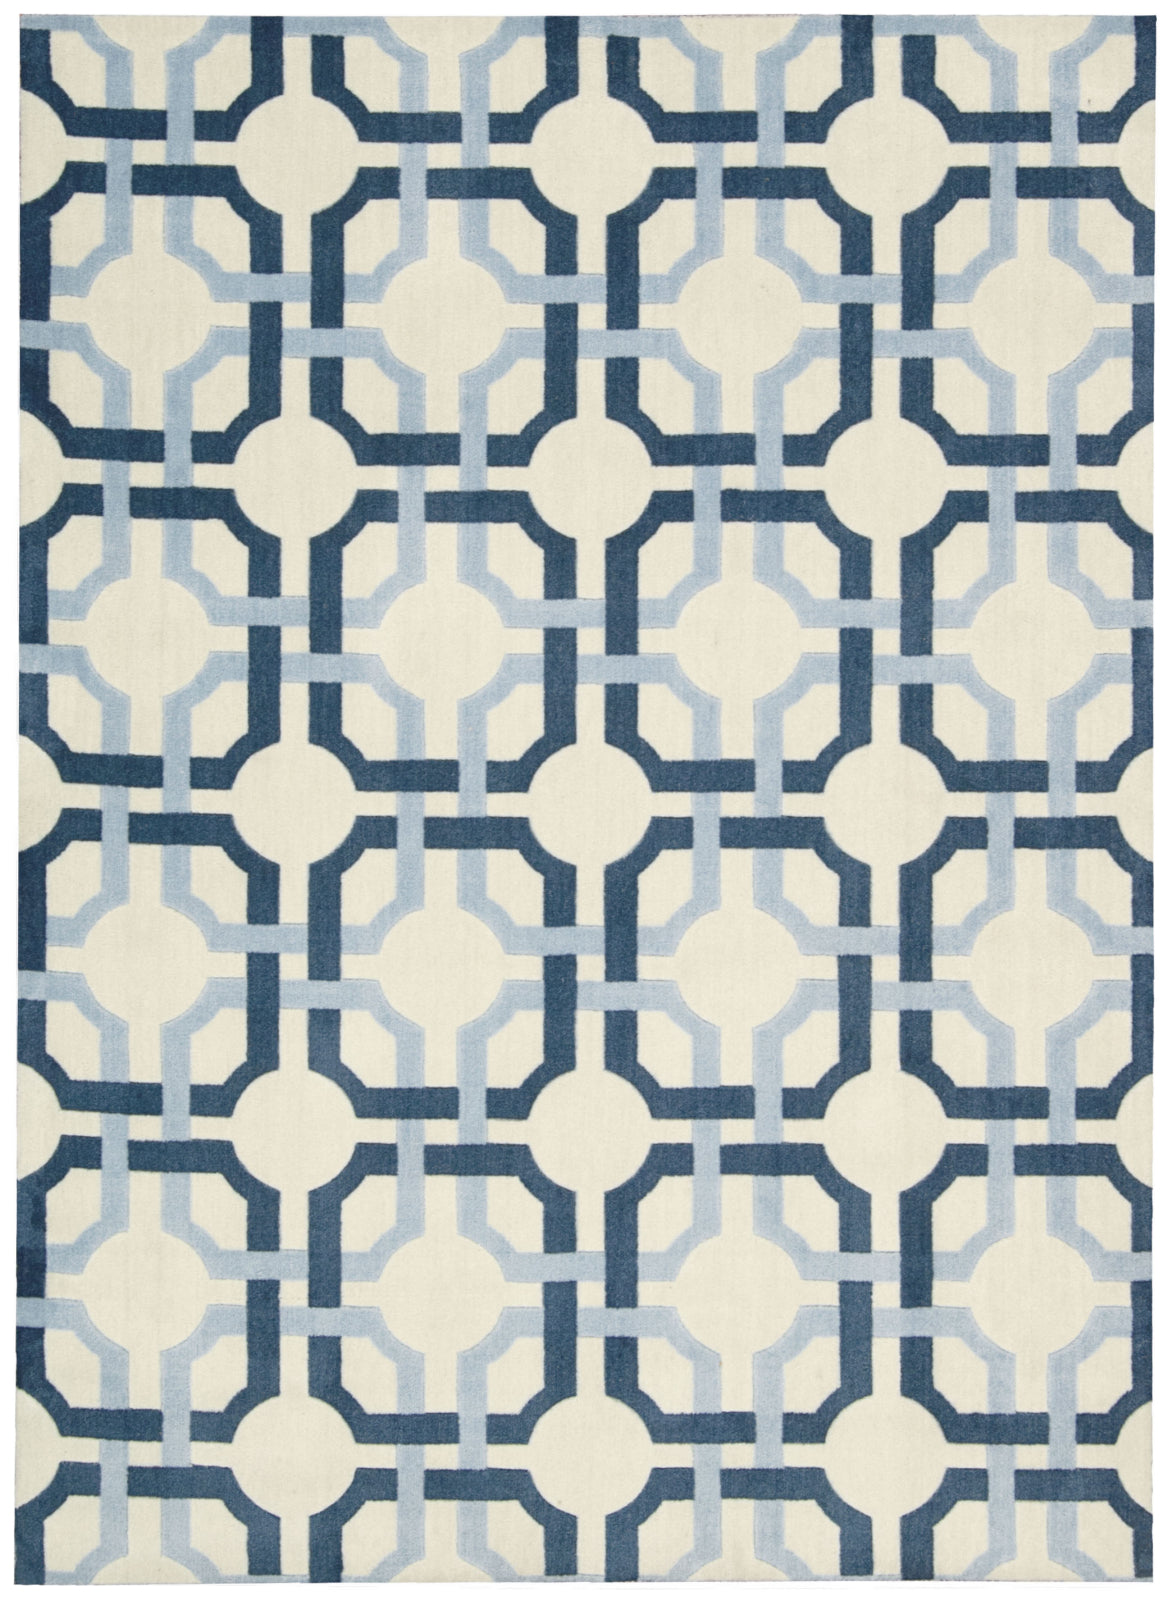 Nourison Artisanal Delight WAD09 Groovy Grille Sky Area Rug by Waverly main image